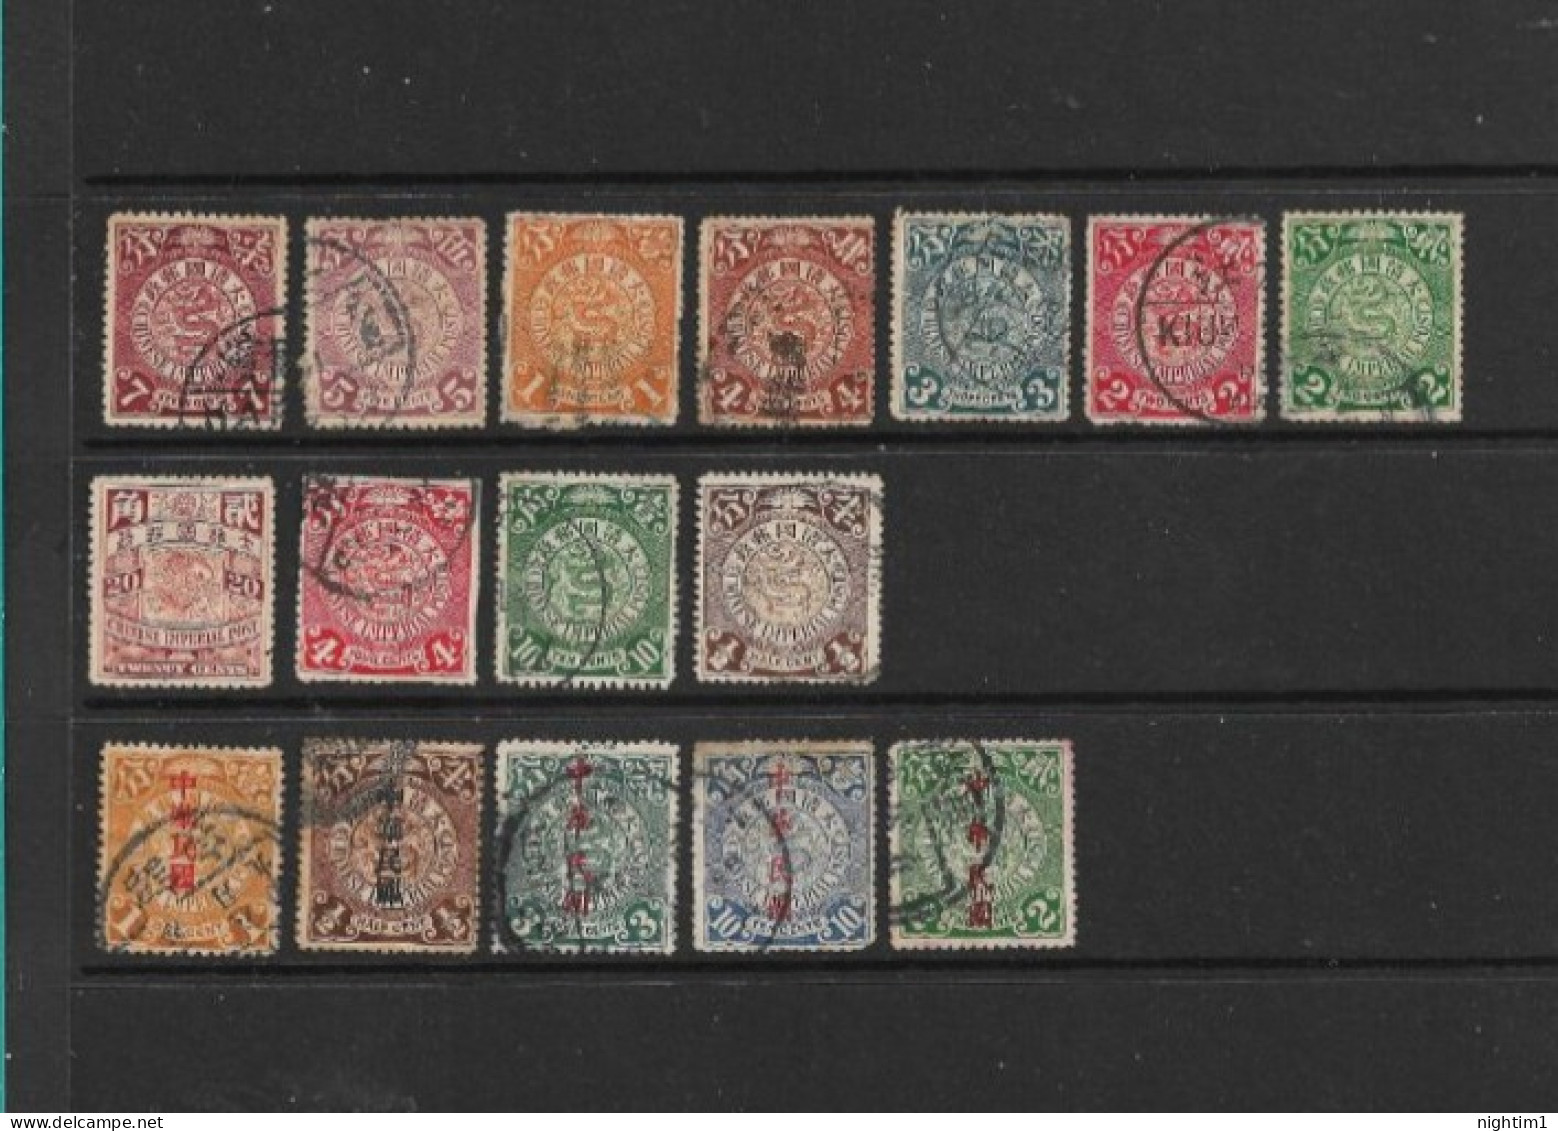 CHINA COLLECTION. COILED SEPENTS USED WITH OVERPRINTED VALUES. NO.2. - Oblitérés